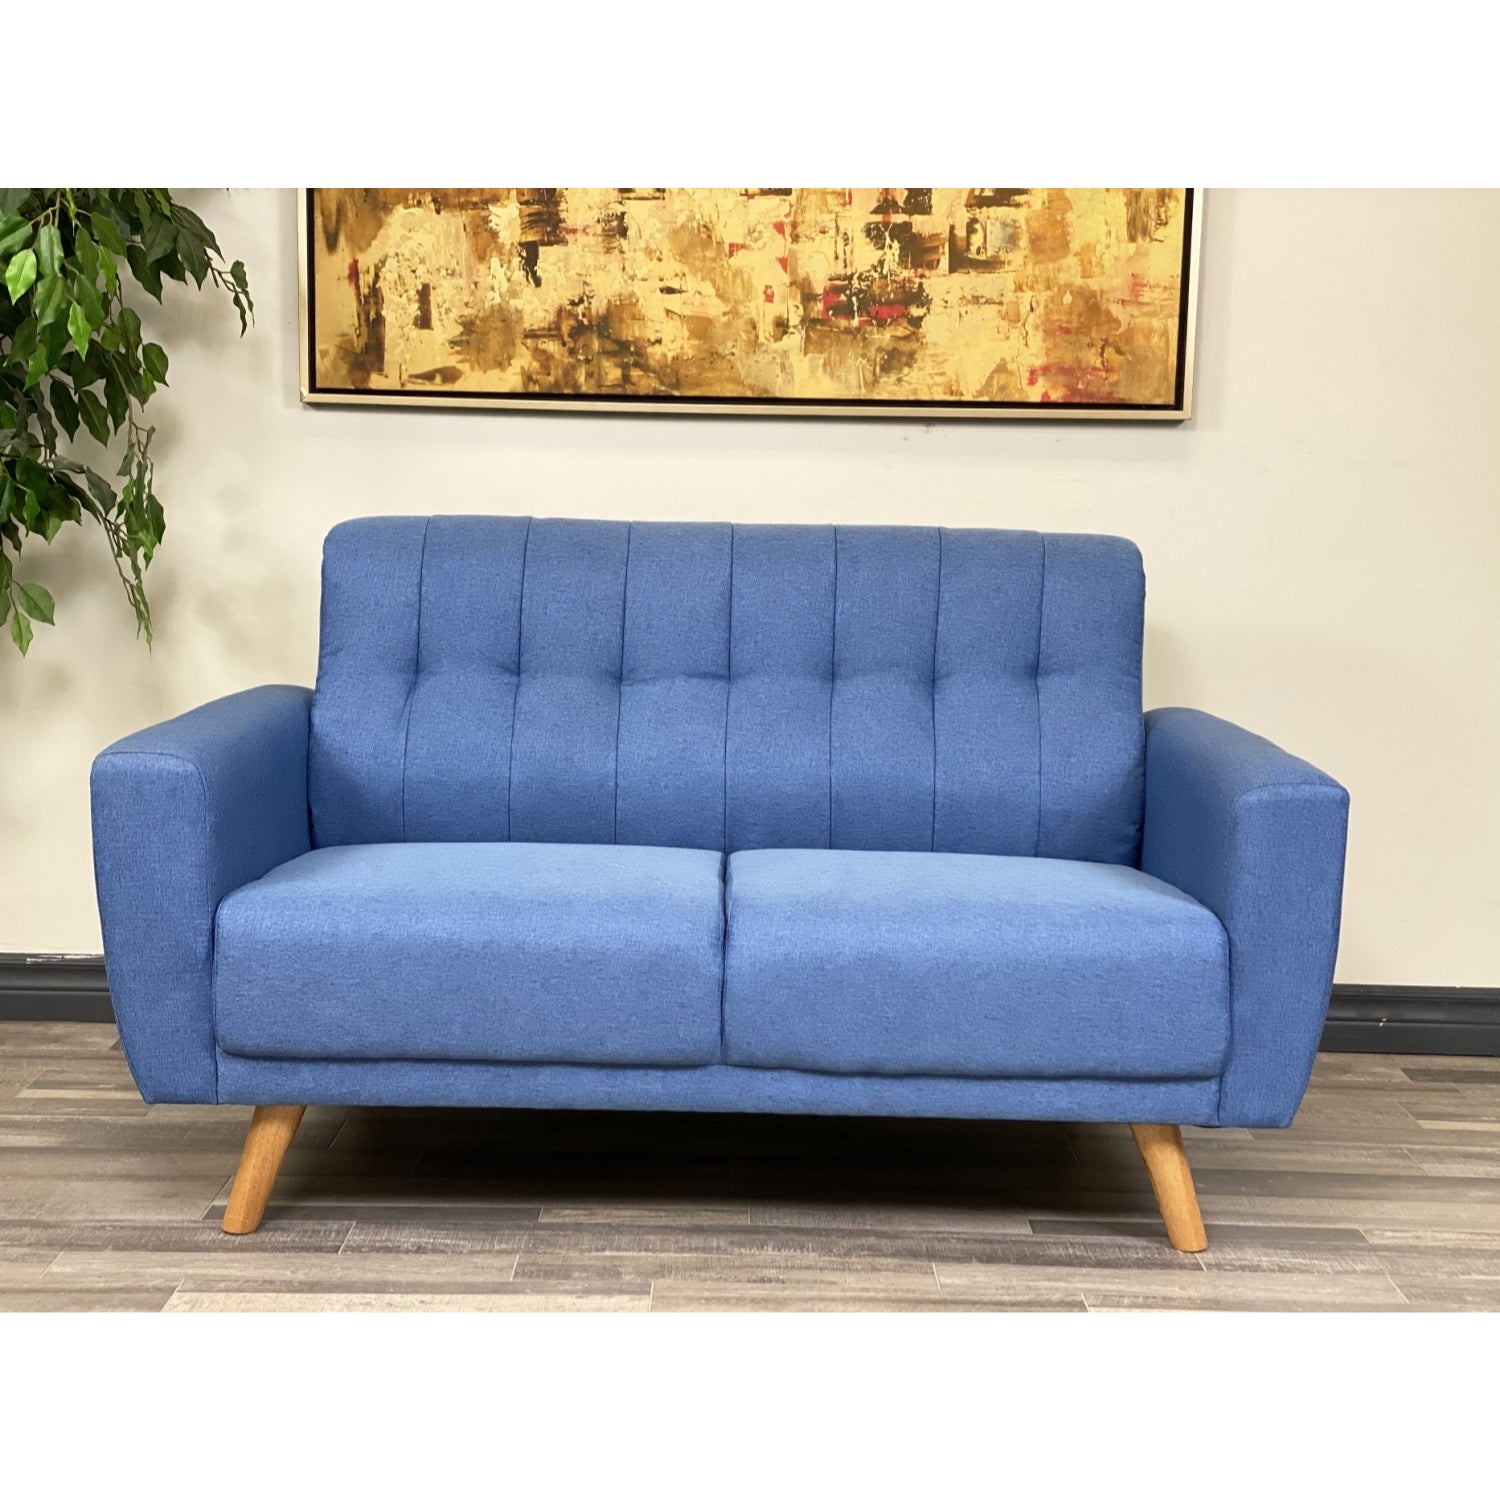 ViscoLogic MOCA Contemporary New Mid-Century Tufted Style Fabric Upholstered Modern Living Room Sofa (Blue)